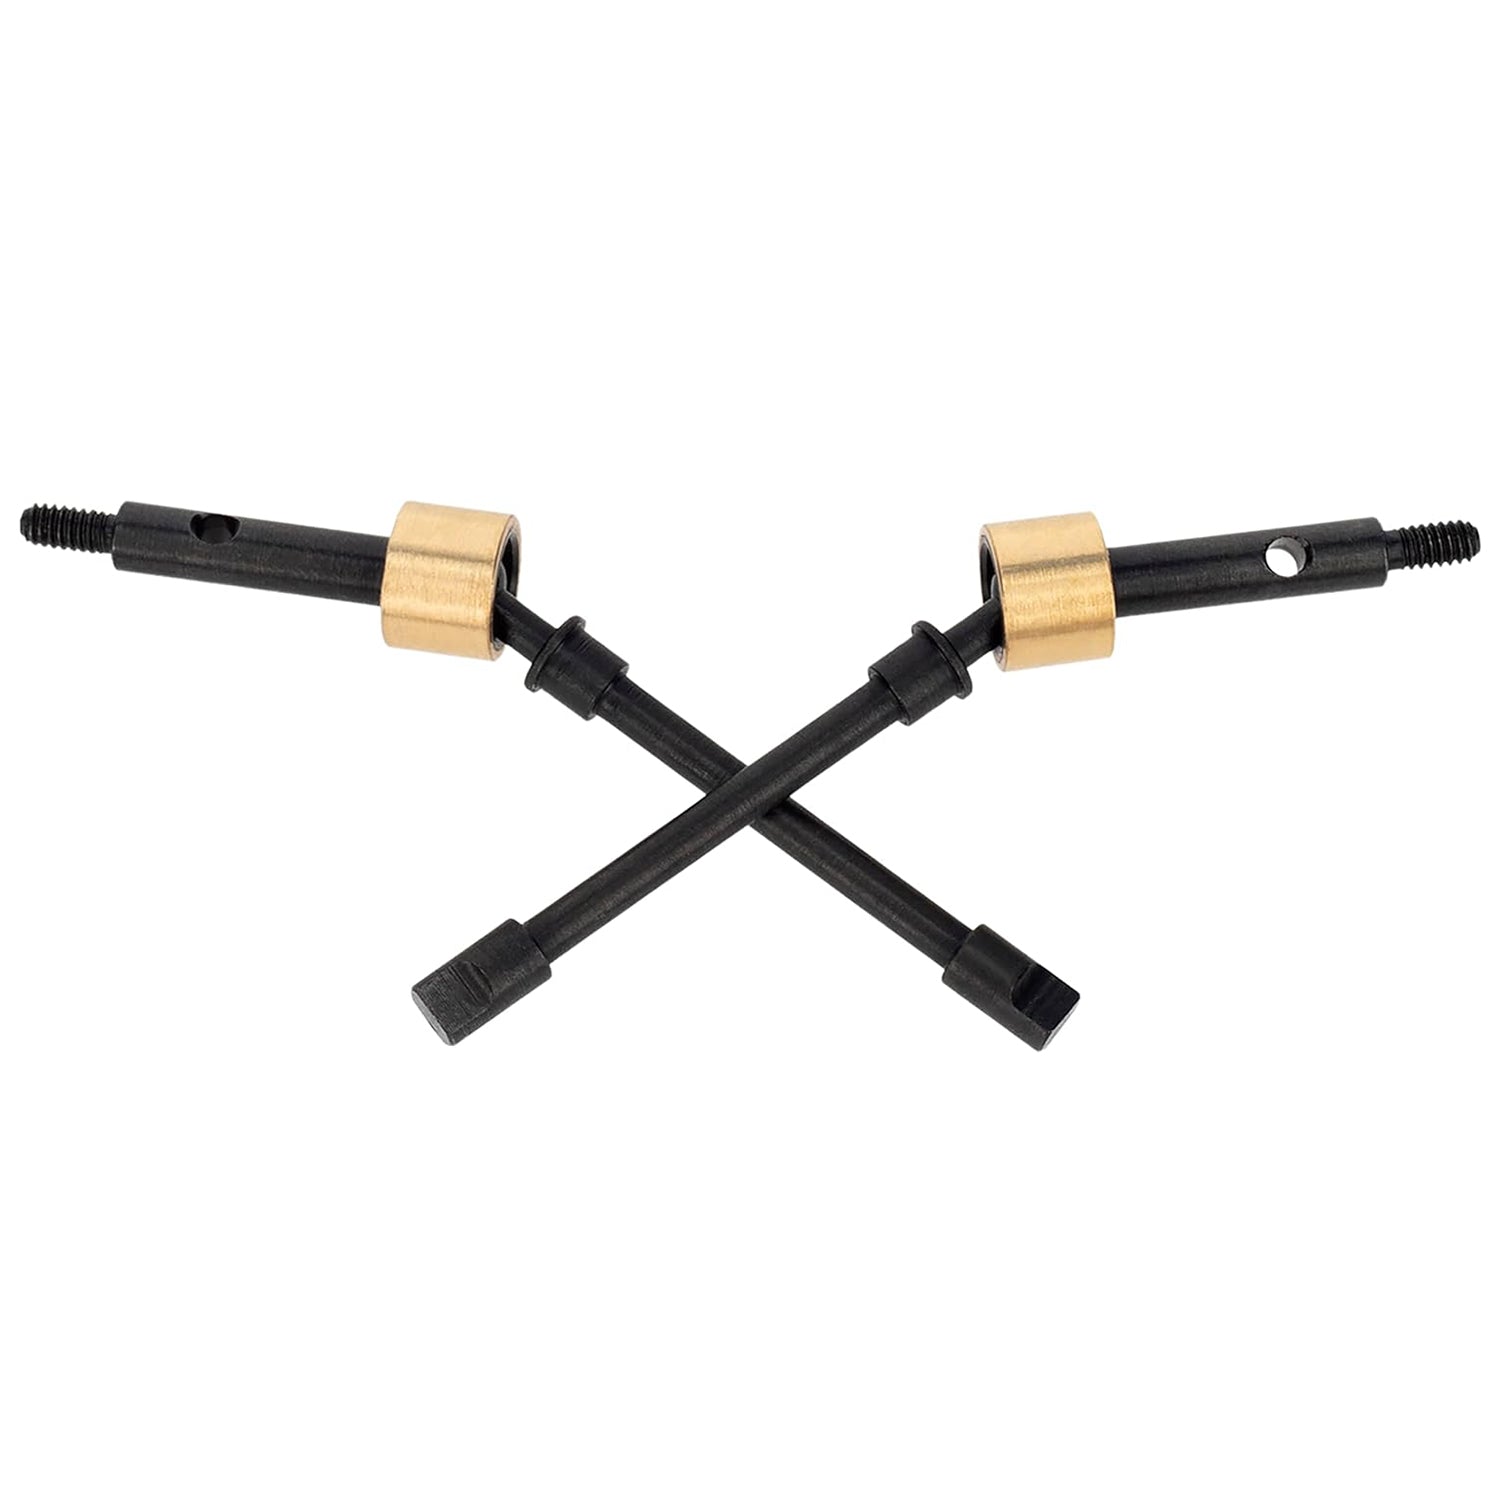 SCX24 front straight axle shafts